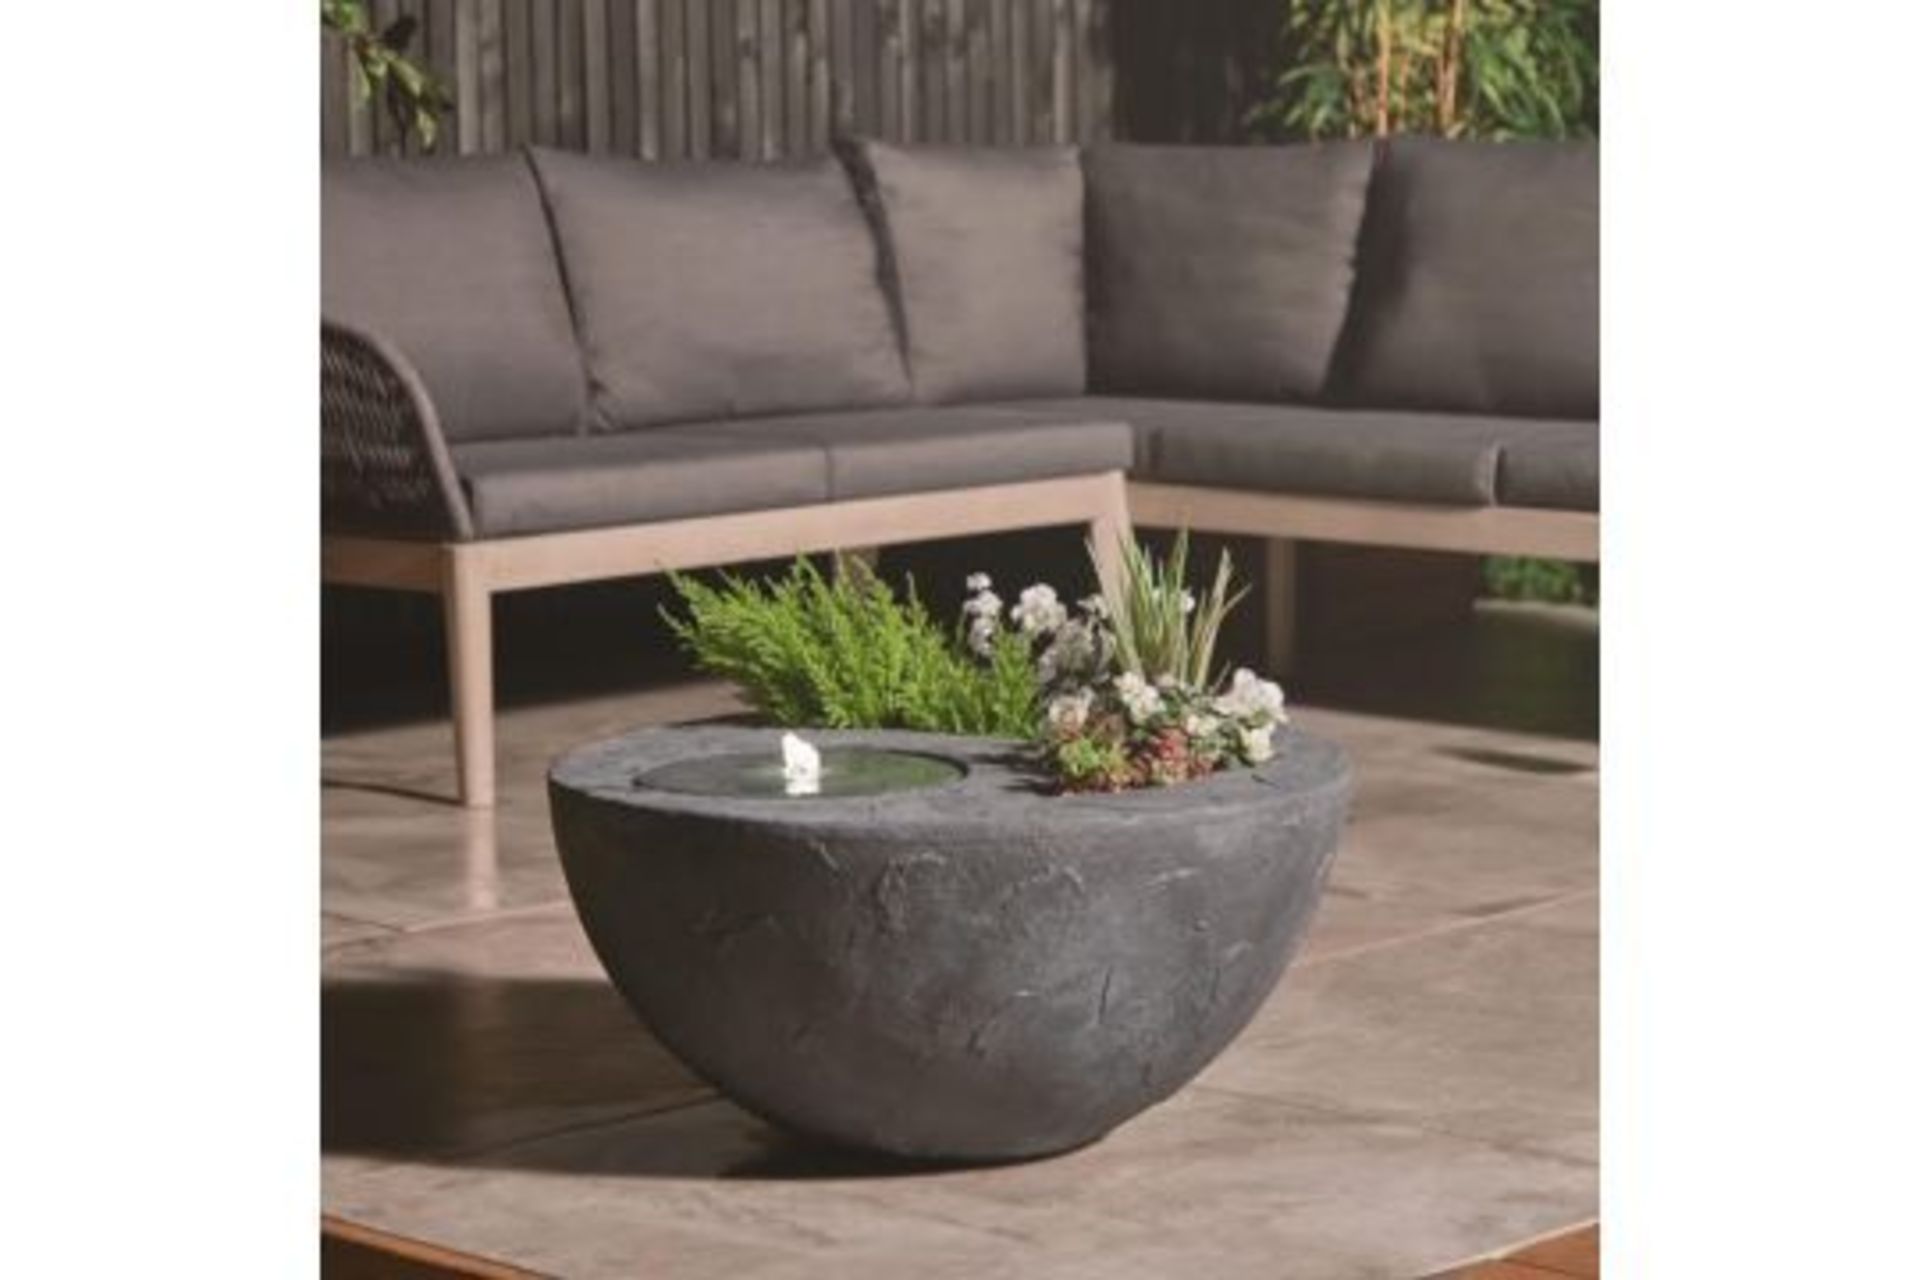 Trade Lot 4 x New & Boxed Dual Water Feature and Planter. RRP £299.99 (REF726) - Garden Bowl